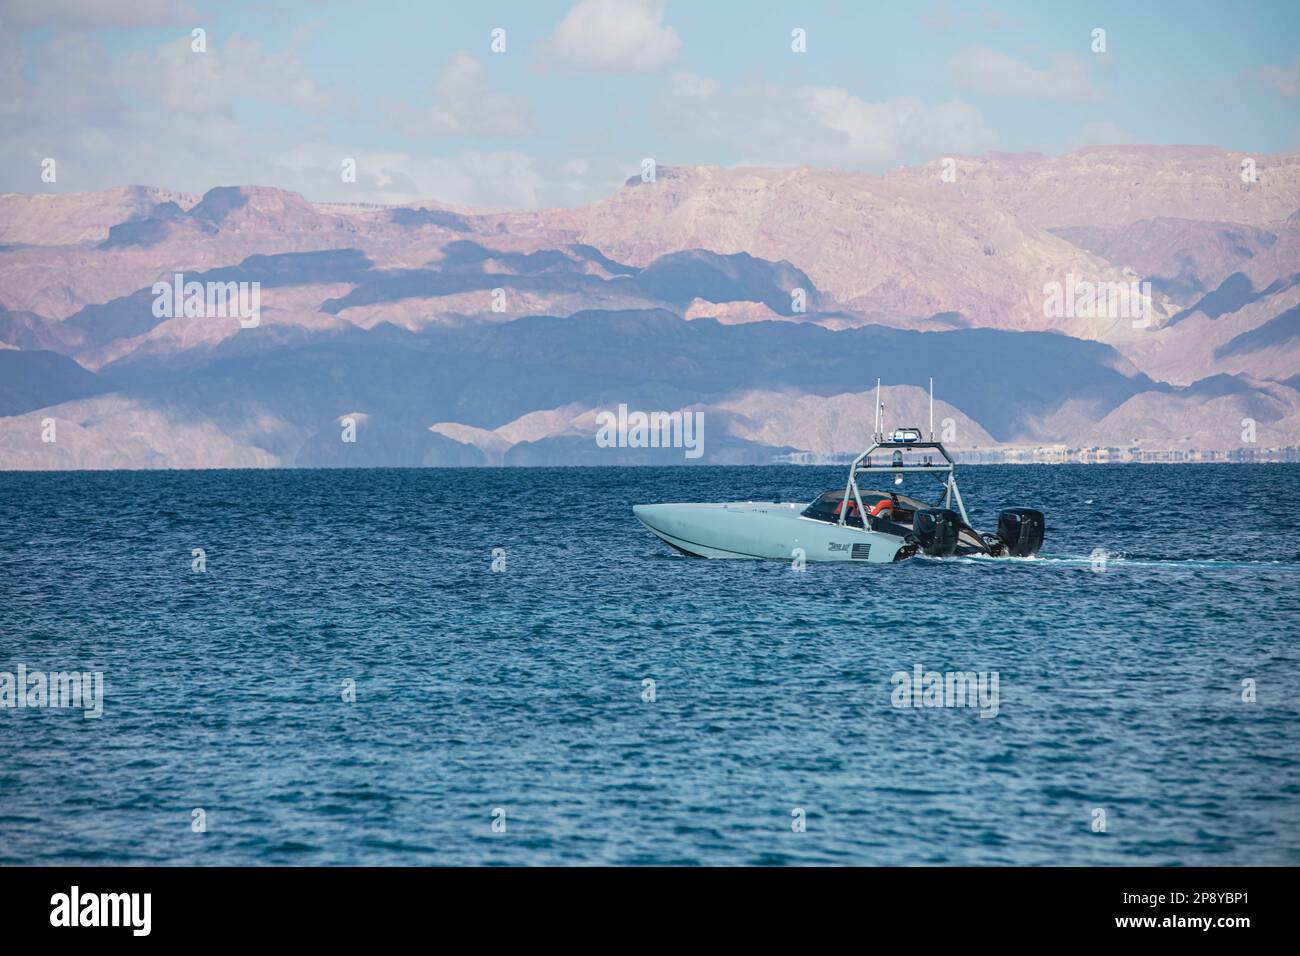 230308-A-NR779-2002 GULF OF AQABA (March 8, 2023) A MARTAC T-38 Devil Ray unmanned surface vessel operates in the Gulf of Aqaba, Mar. 8, 2023, during International Maritime Exercise 2023. IMX/CE 2023 is the largest multinational training event in the Middle East, involving 7,000 personnel from more than 50 nations and international organizations committed to preserving the rules-based international order and strengthening regional maritime security cooperation. (U.S. Army photo by Spc. Aaron Troutman) Stock Photo